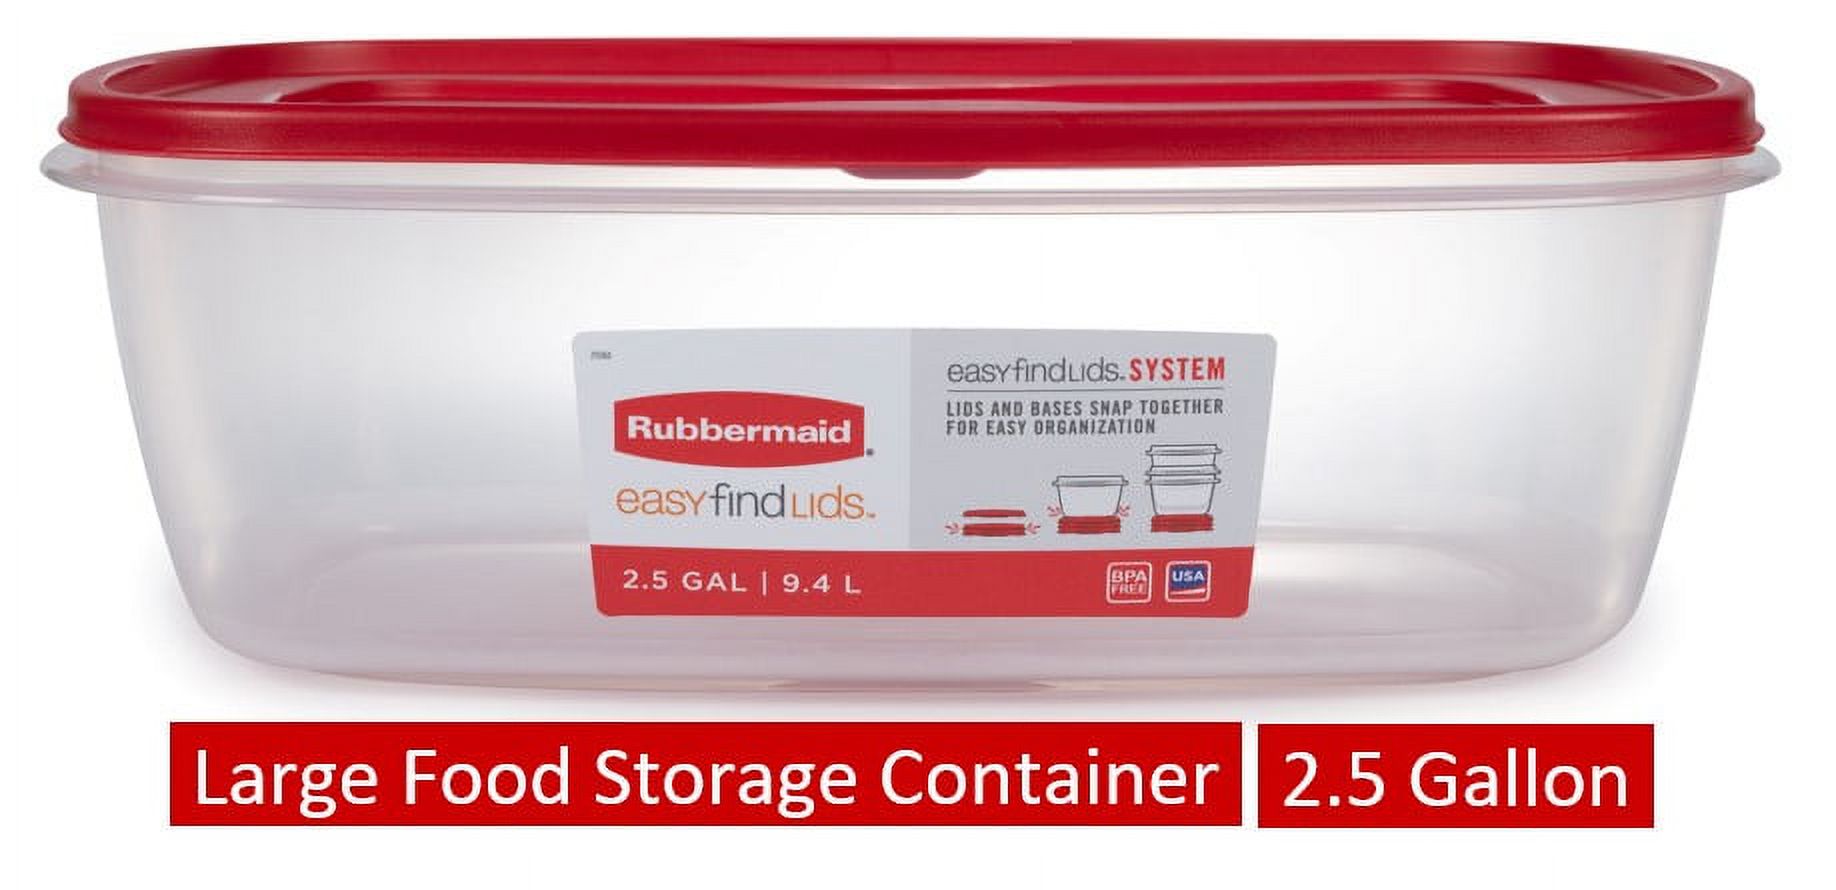 Rubbermaid Easy Find Lids Food Storage Container, Large with Red Lid, 2.5 Gallon - image 1 of 8